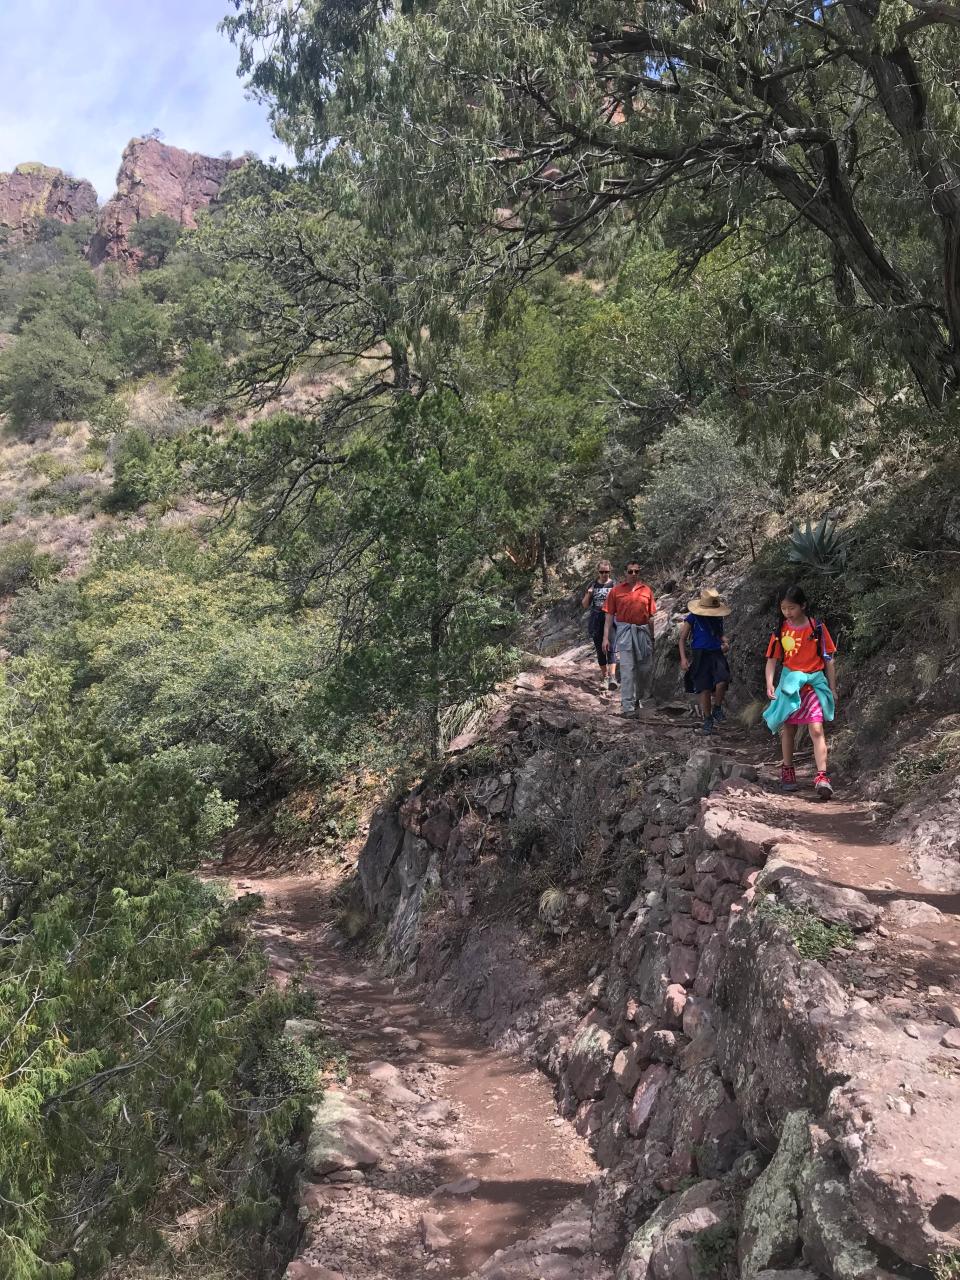 Hikers move down the switchbacks on the Lost Mine Trail in Big Bend National Park, Texas. The trail, constructed by members of the Civilian Conservation Corps (CCC) in the early 1940s, shows evidence of their skilled craftsmanship in the stonework. It weaves through juniper, oak and pine forest.